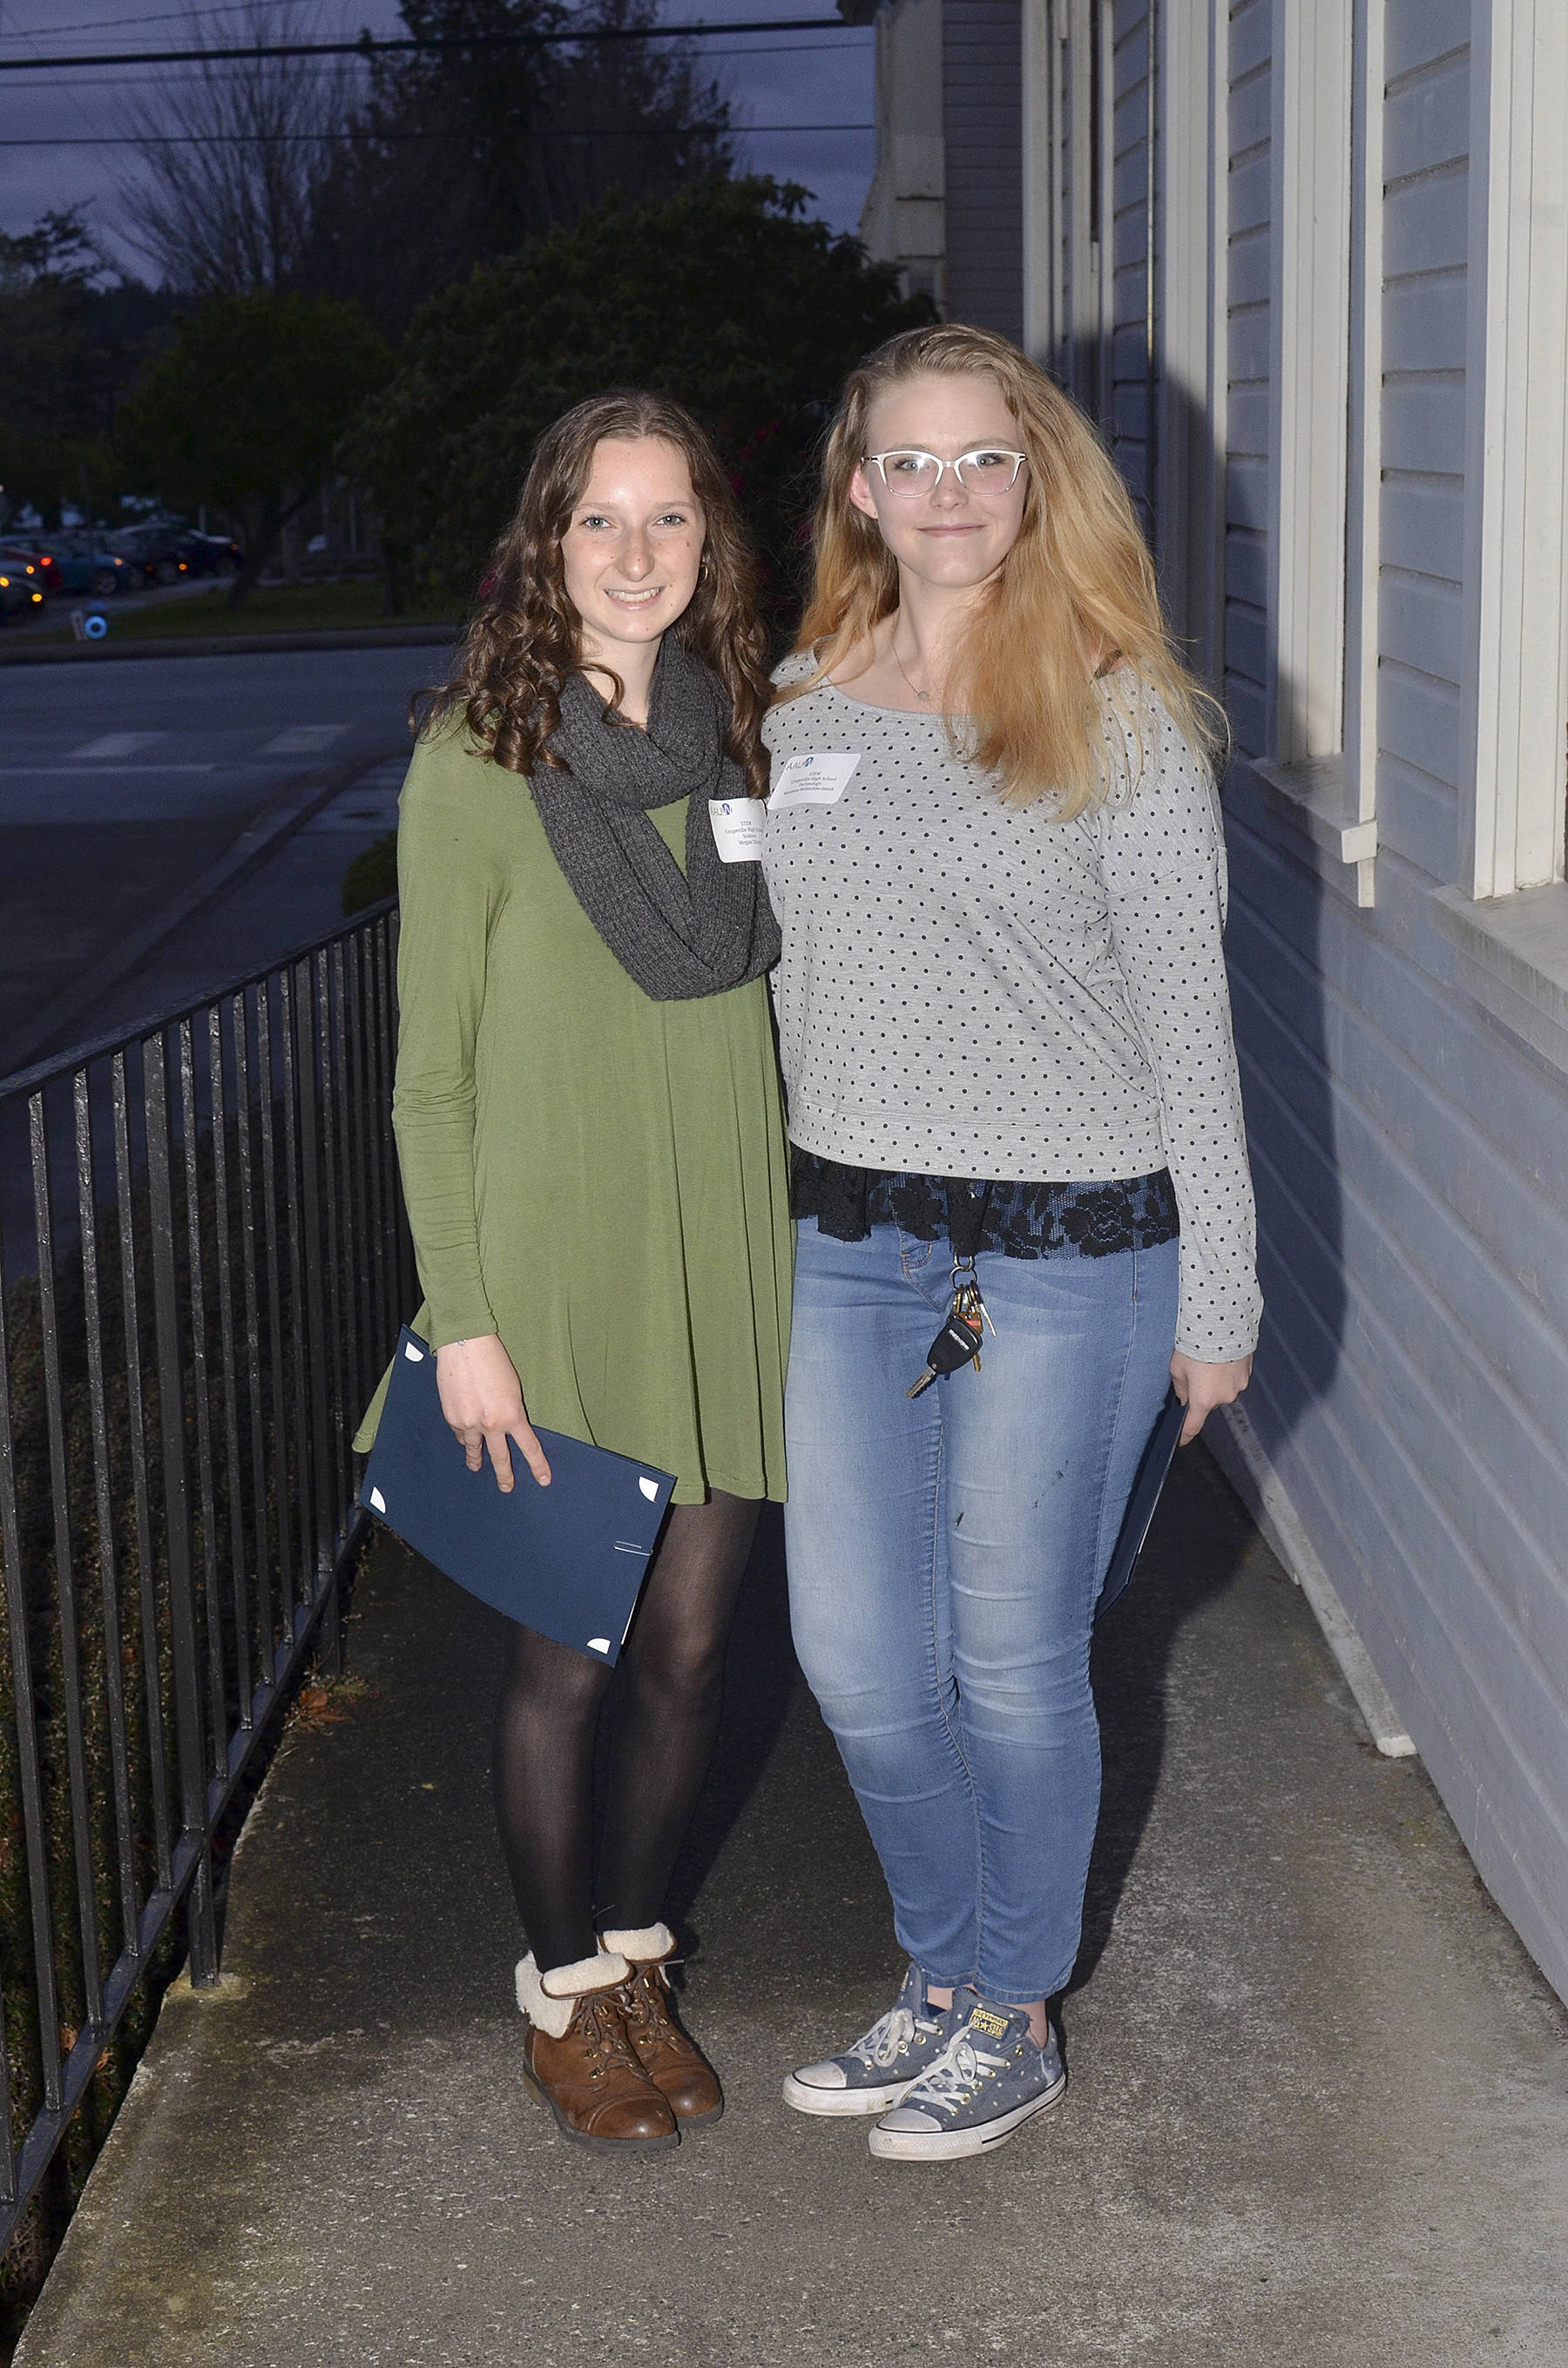 The 2019 AAUW STEM scholars from left to right are Megan Thorn and Marenna Rebischke-Smith from Coupeville High School.